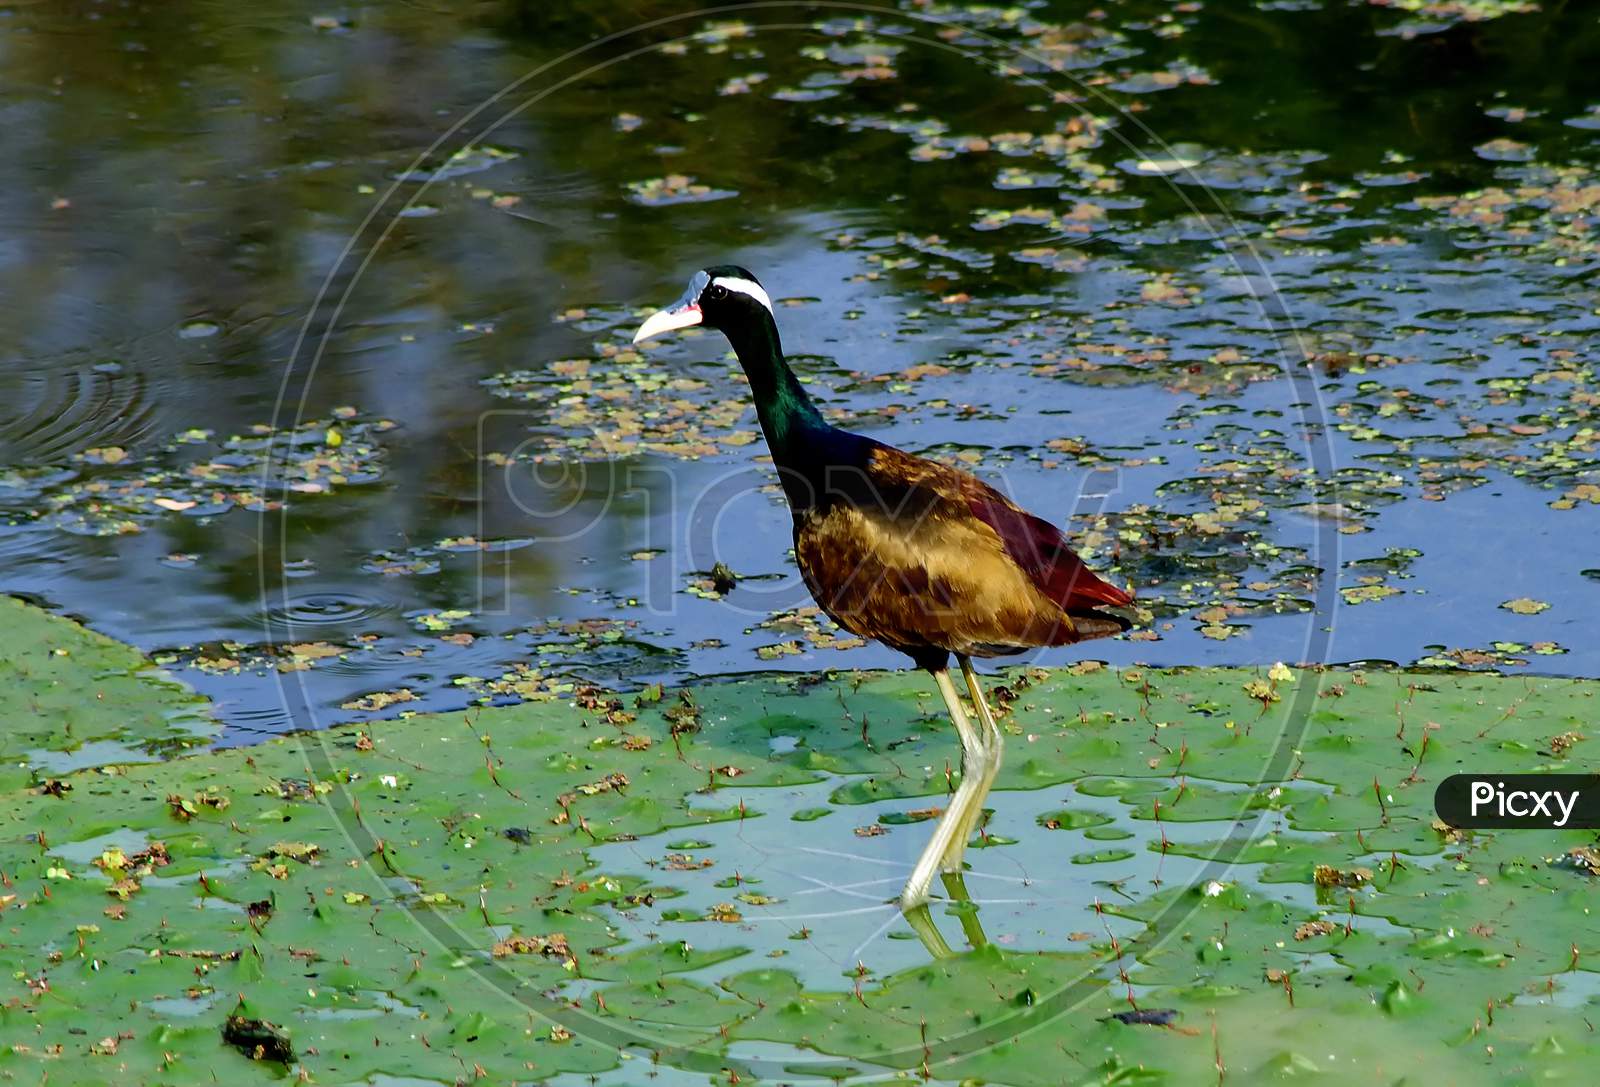 The colourful wild bird in a lake.